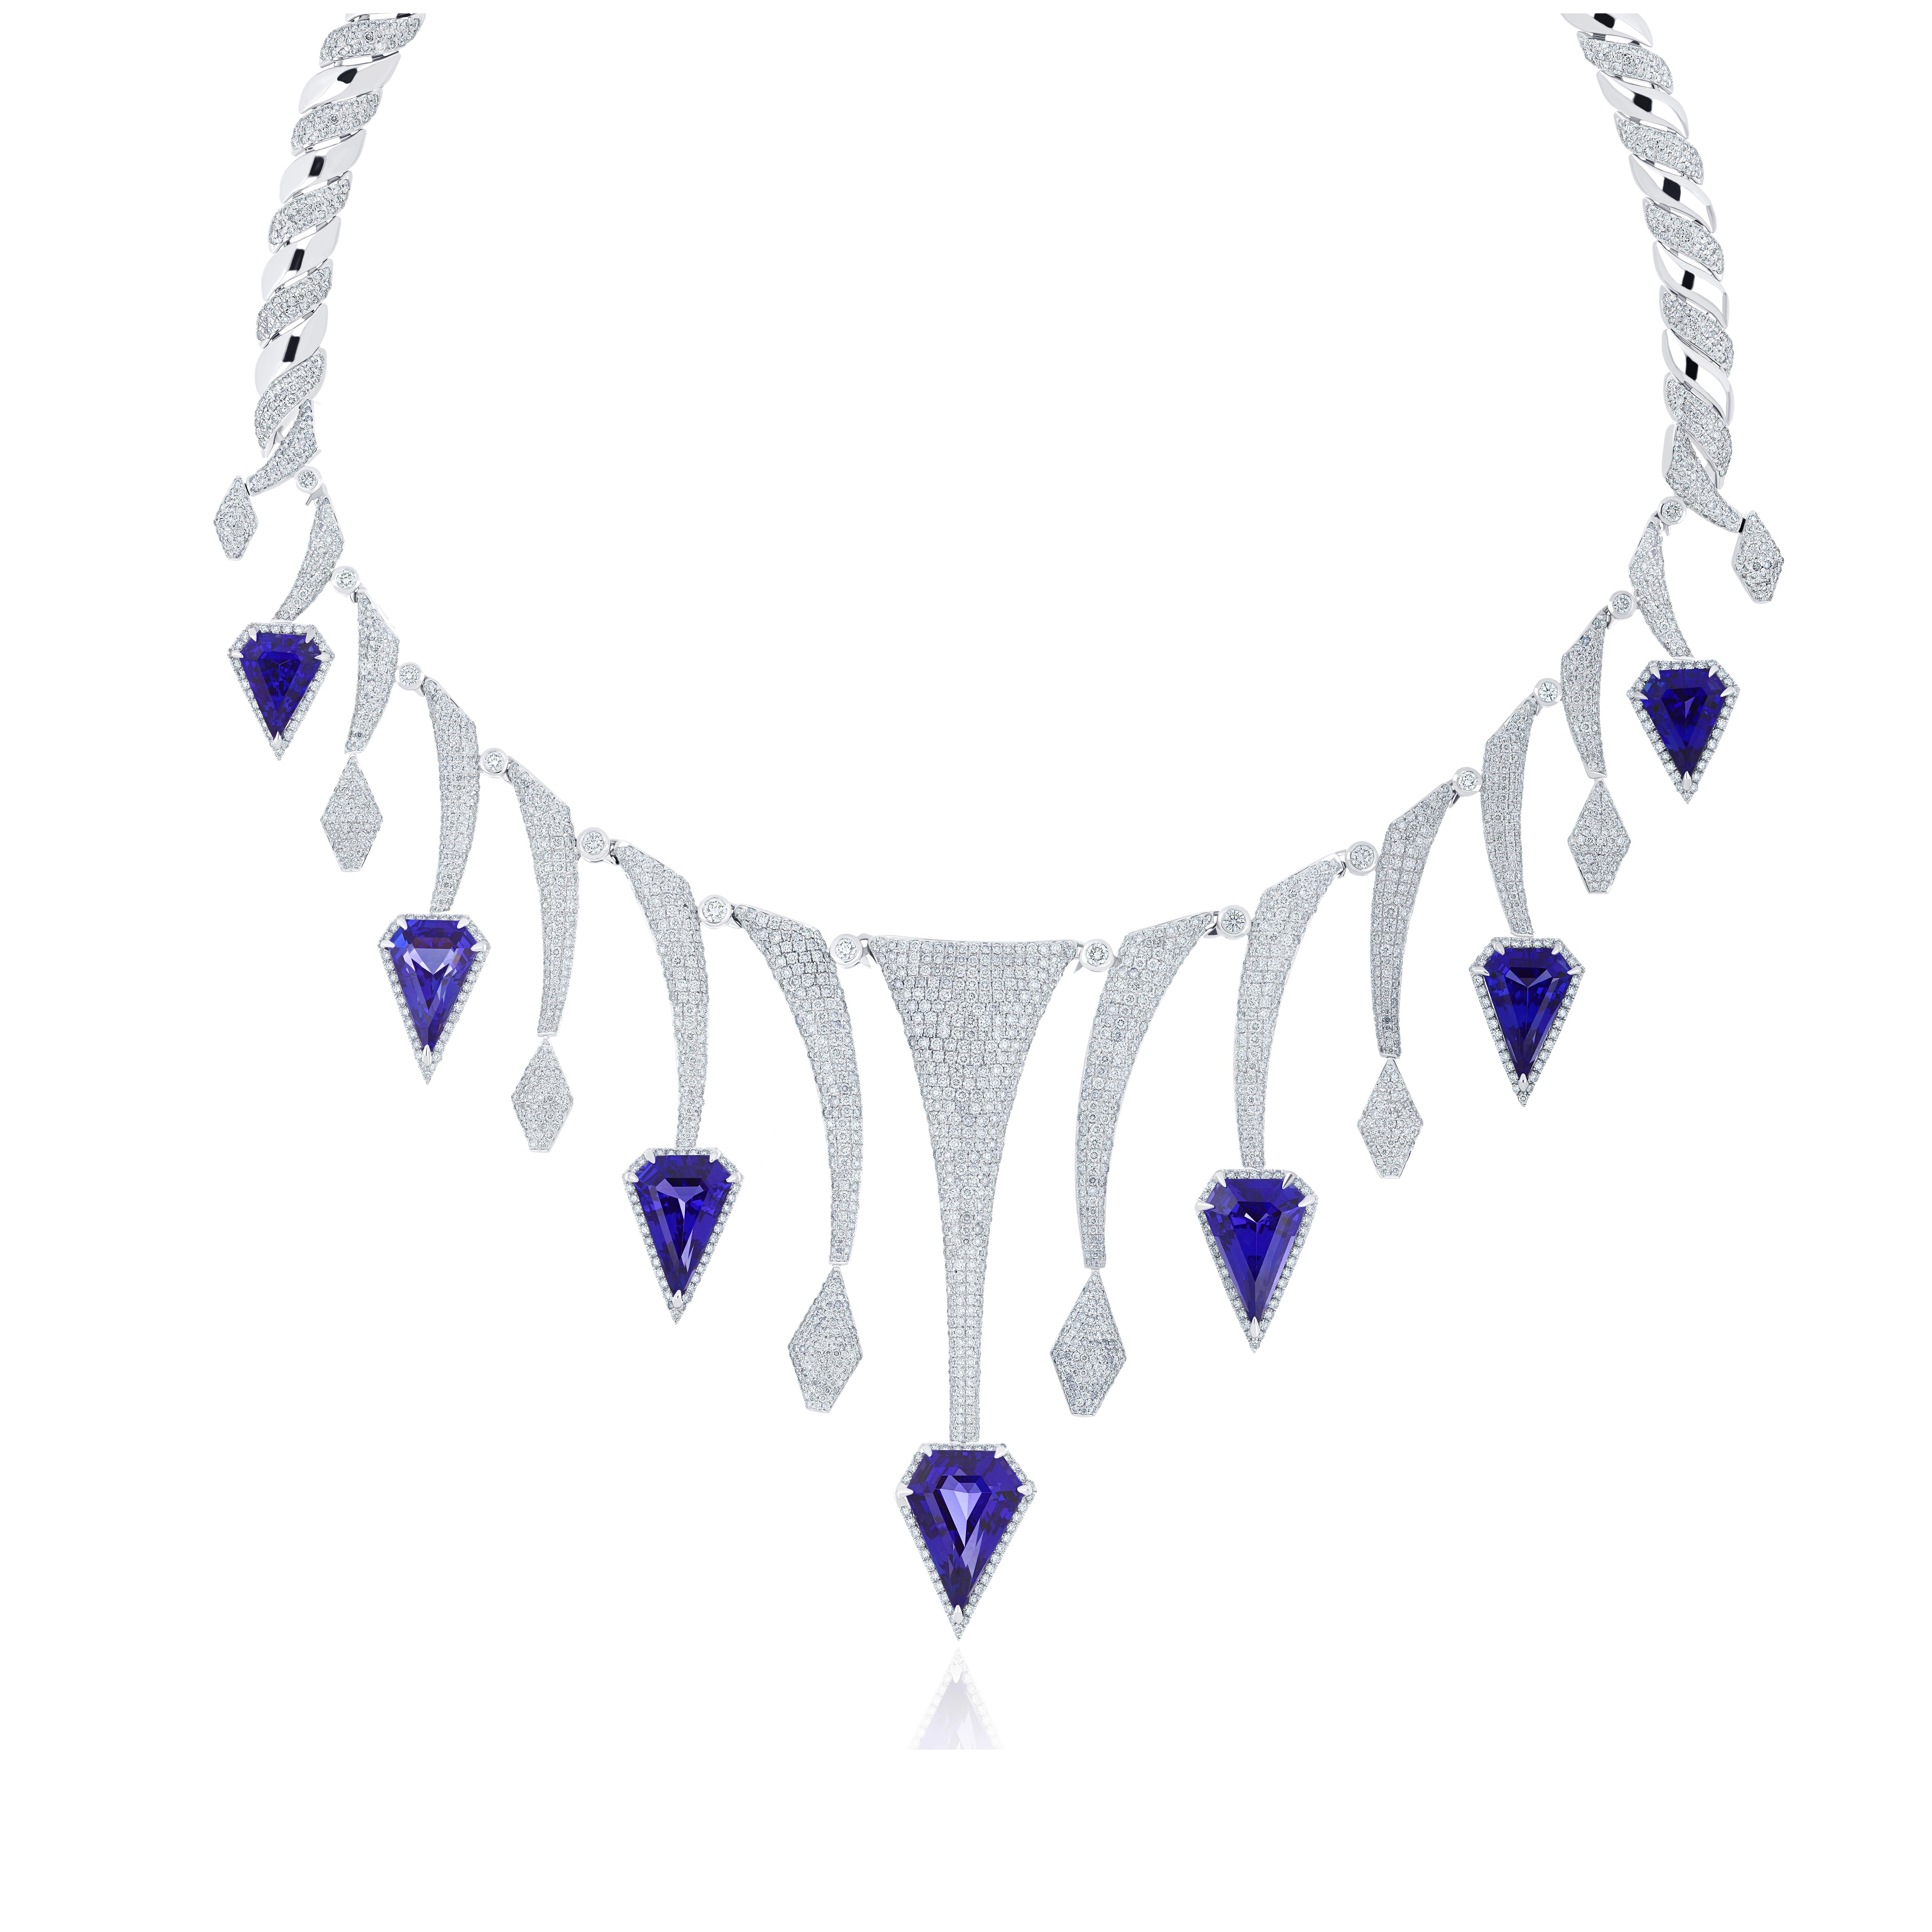 Elegant and Exquisitely detailed Gold Necklace, with 61.5Cts(approx.) Fancy Shape Tanzanite set in the center beautifully accented with Micro pave set Diamonds, weighing approx. 18.8 CT's (approx.). total carat weight to further enhance the beauty